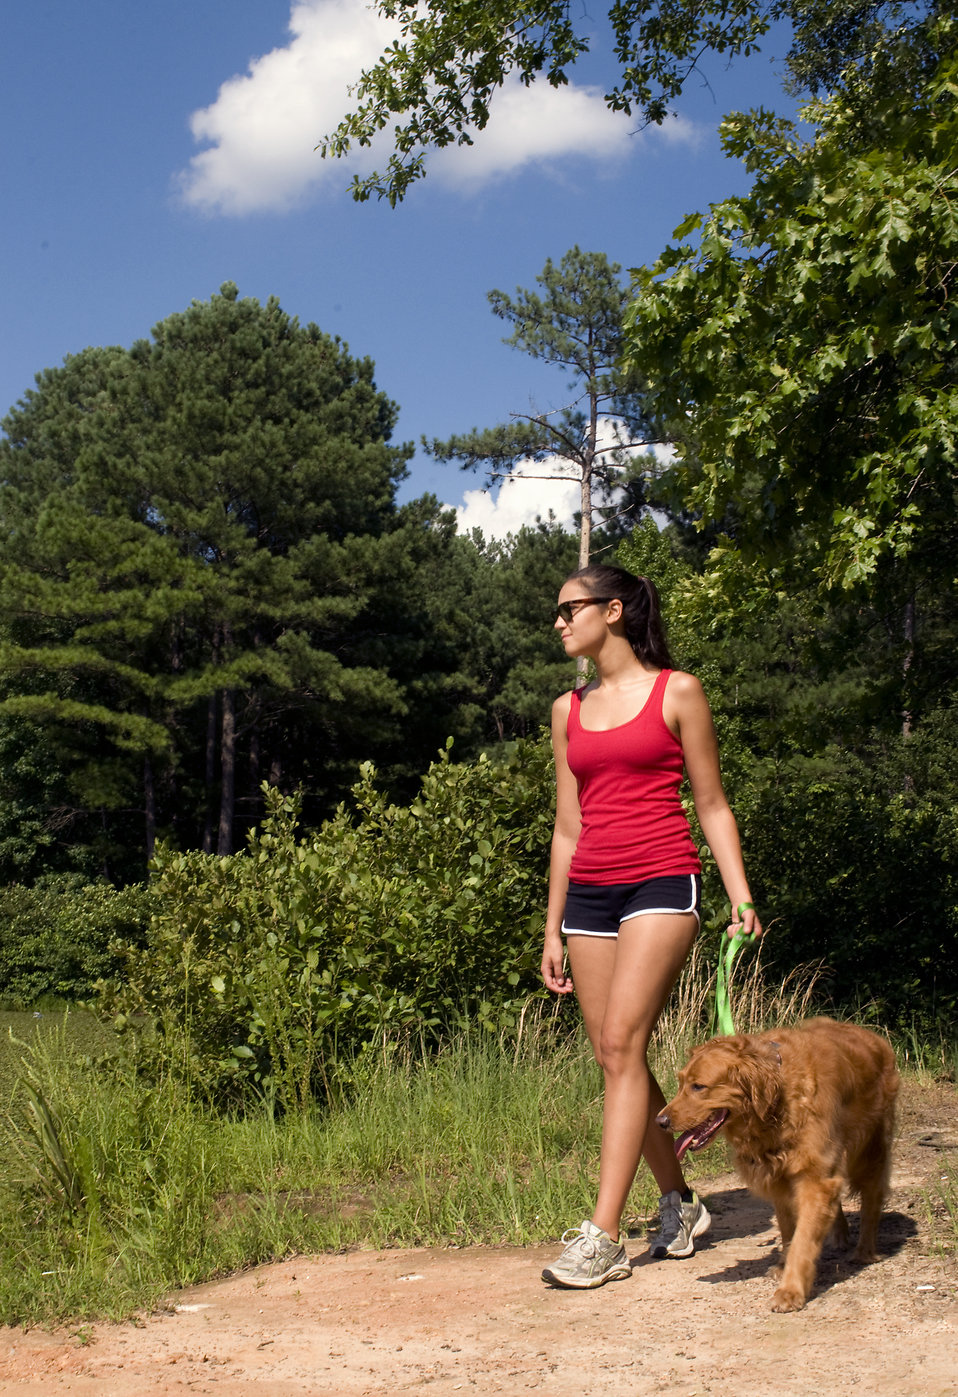 A young woman walking her dog outdoors : Free Stock Photo